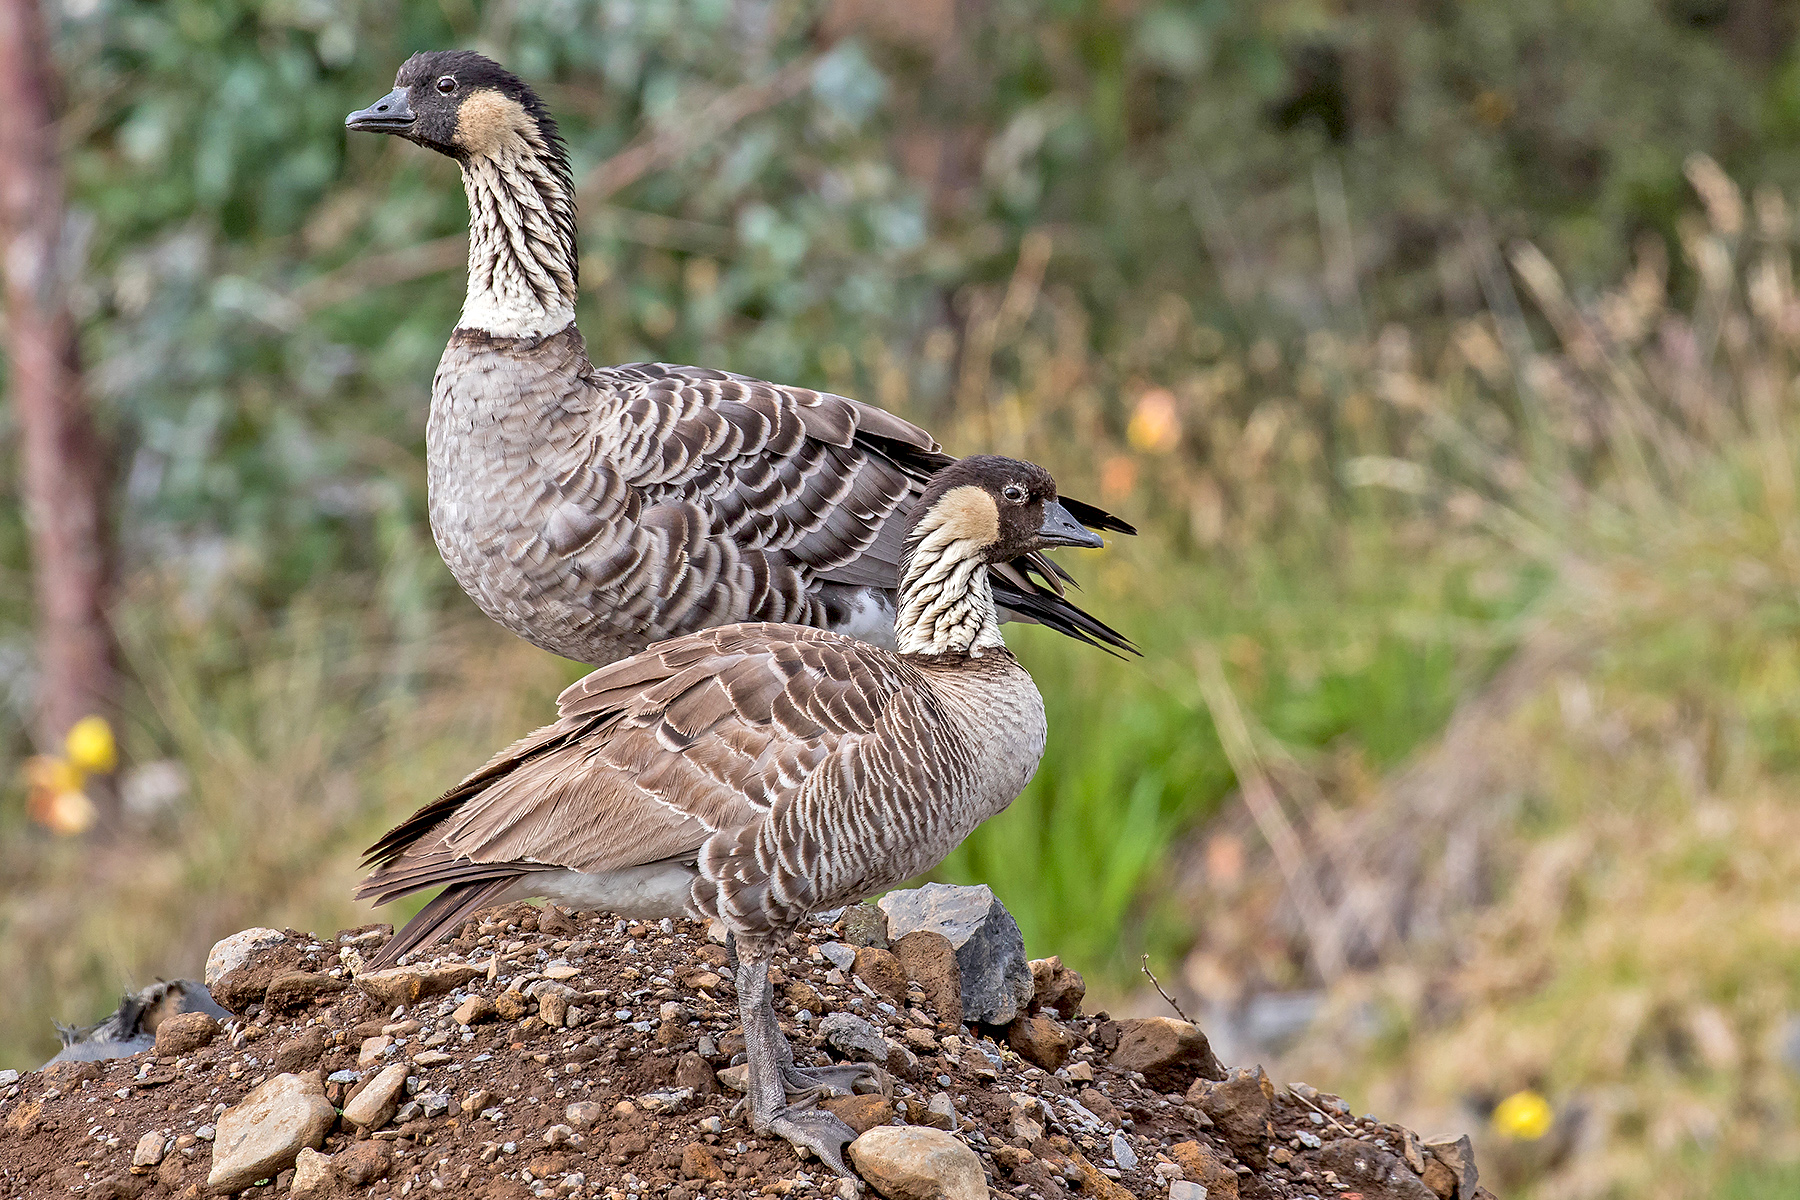 Hawaiian Geese on our Hawaii birding tour (image by Pete Morris)